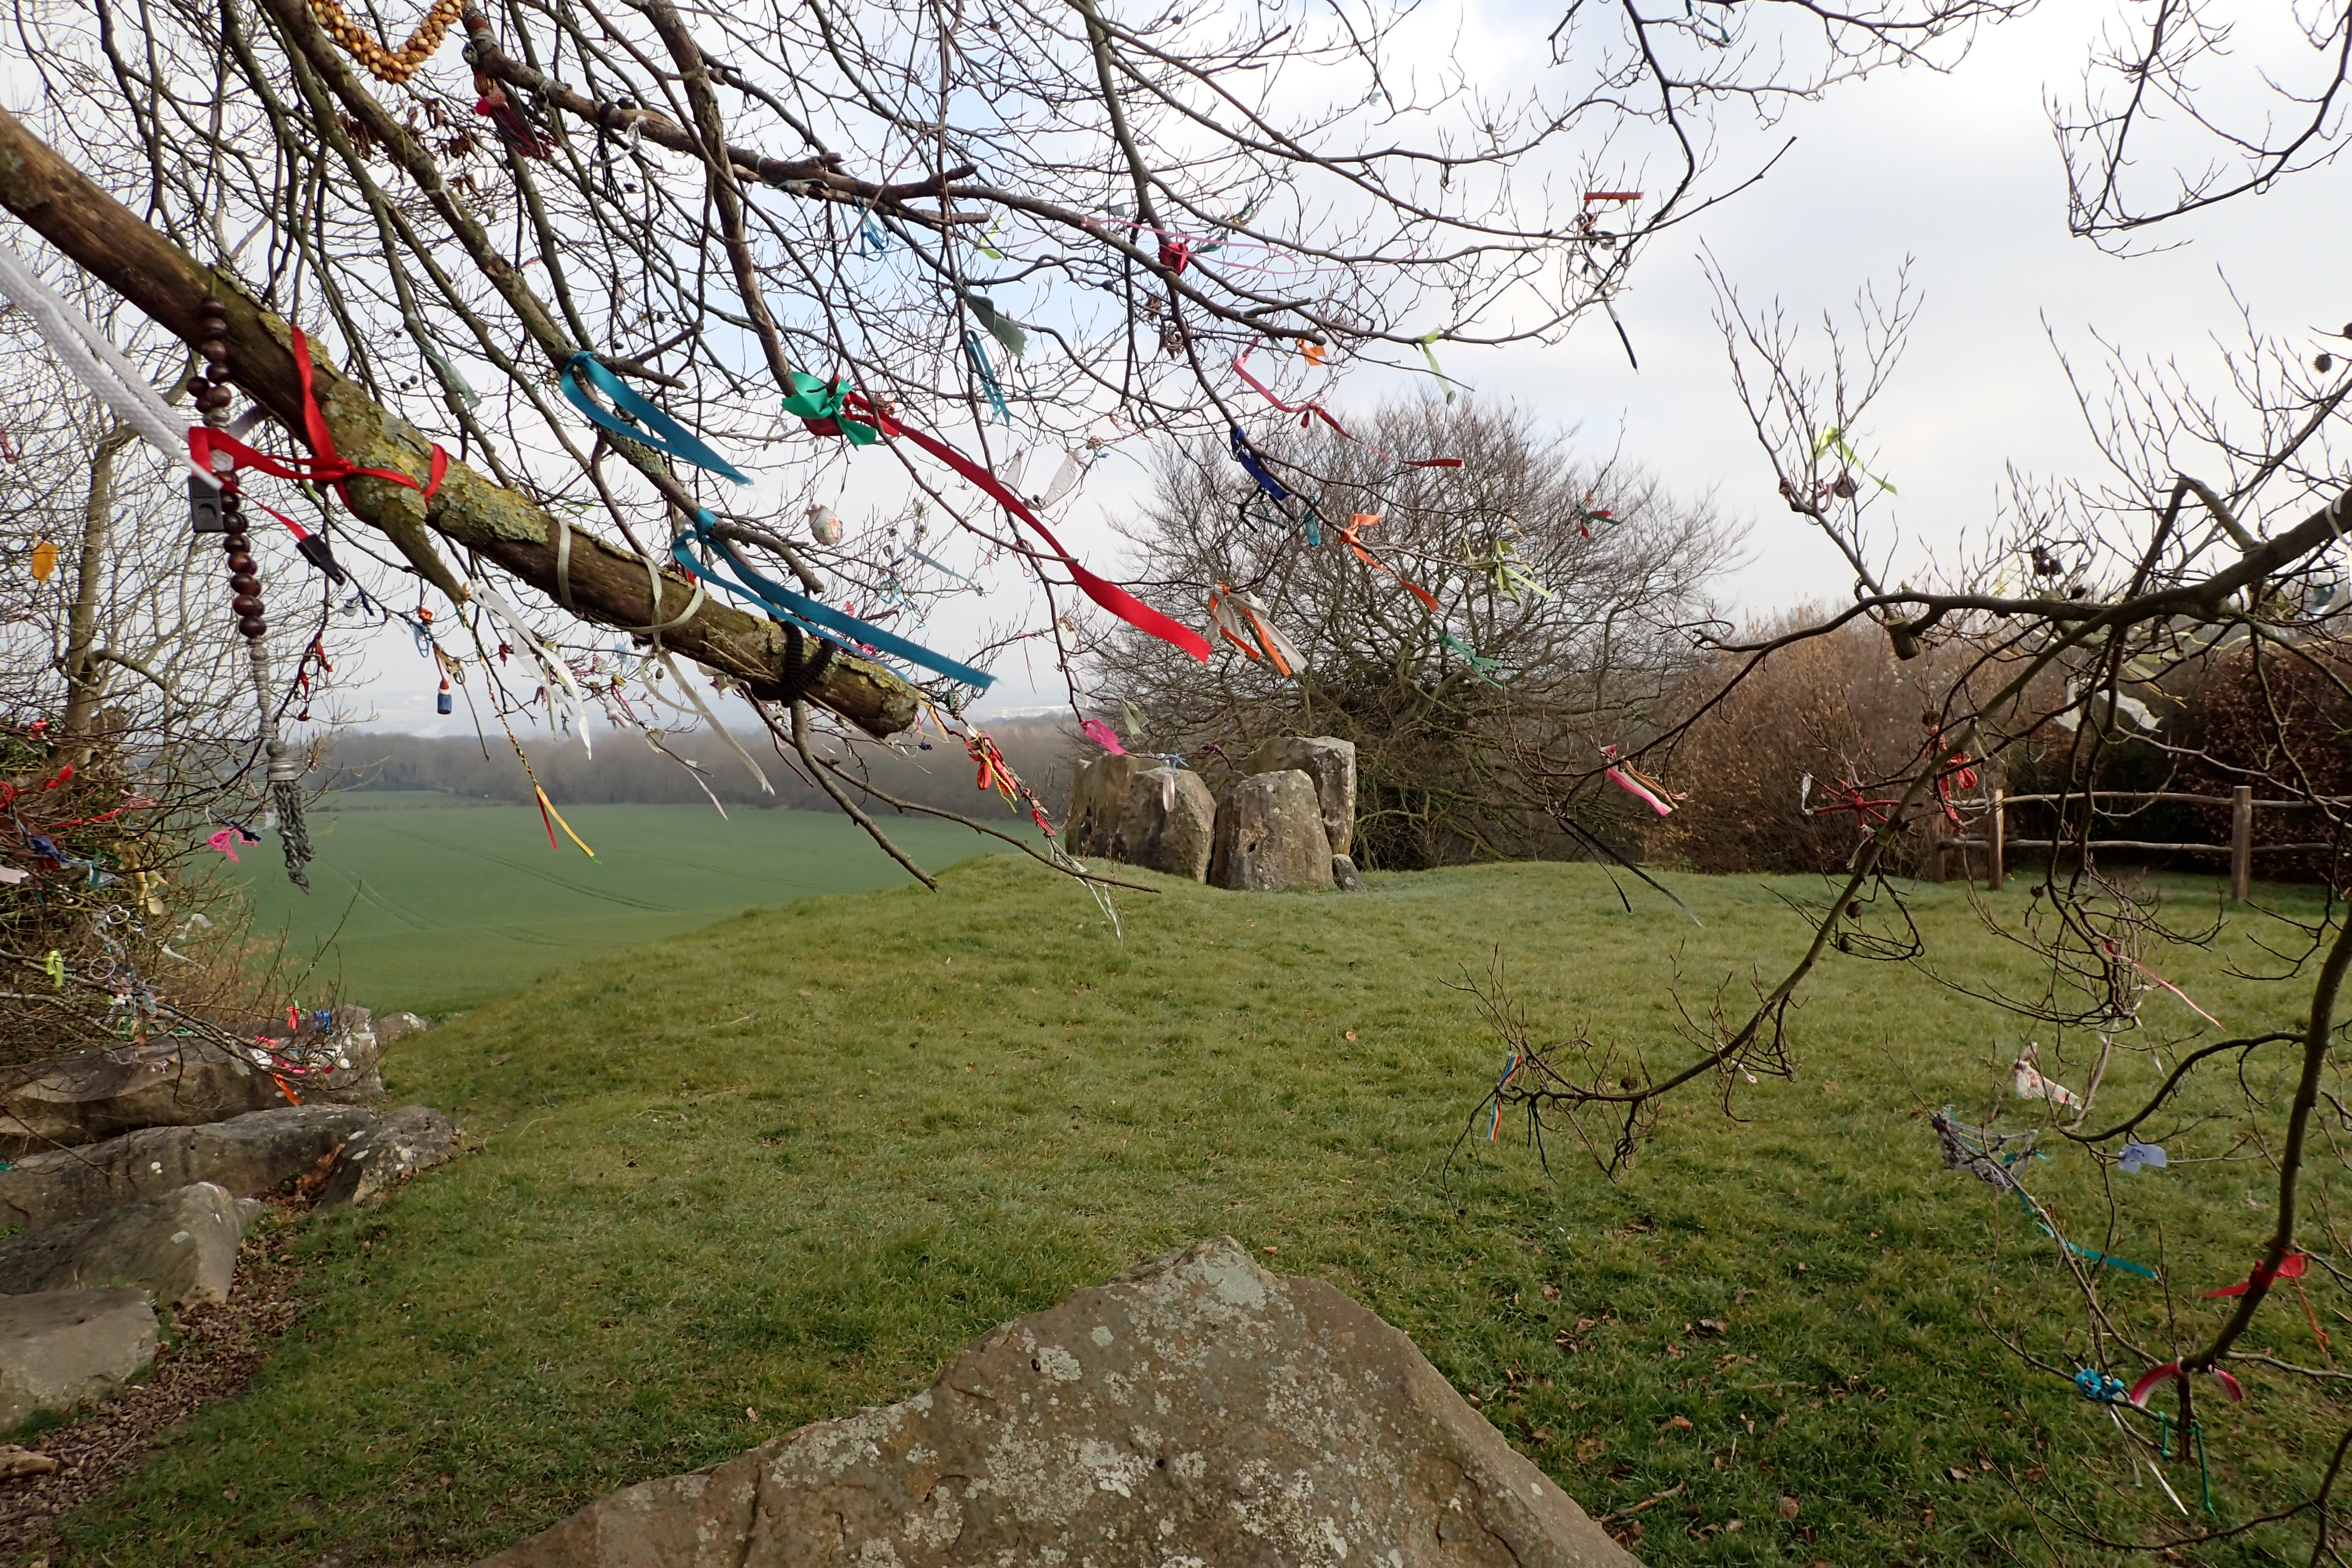 Close to the Pilgrims Way, another path briefly encountered, the Countryway passes by Coldrum Long Barrow. A Neolithic burial chamber of about 2500 B.C. It still attracts the attention of more modern day folk, who have adorned the nearby trees with trinkets and letters 